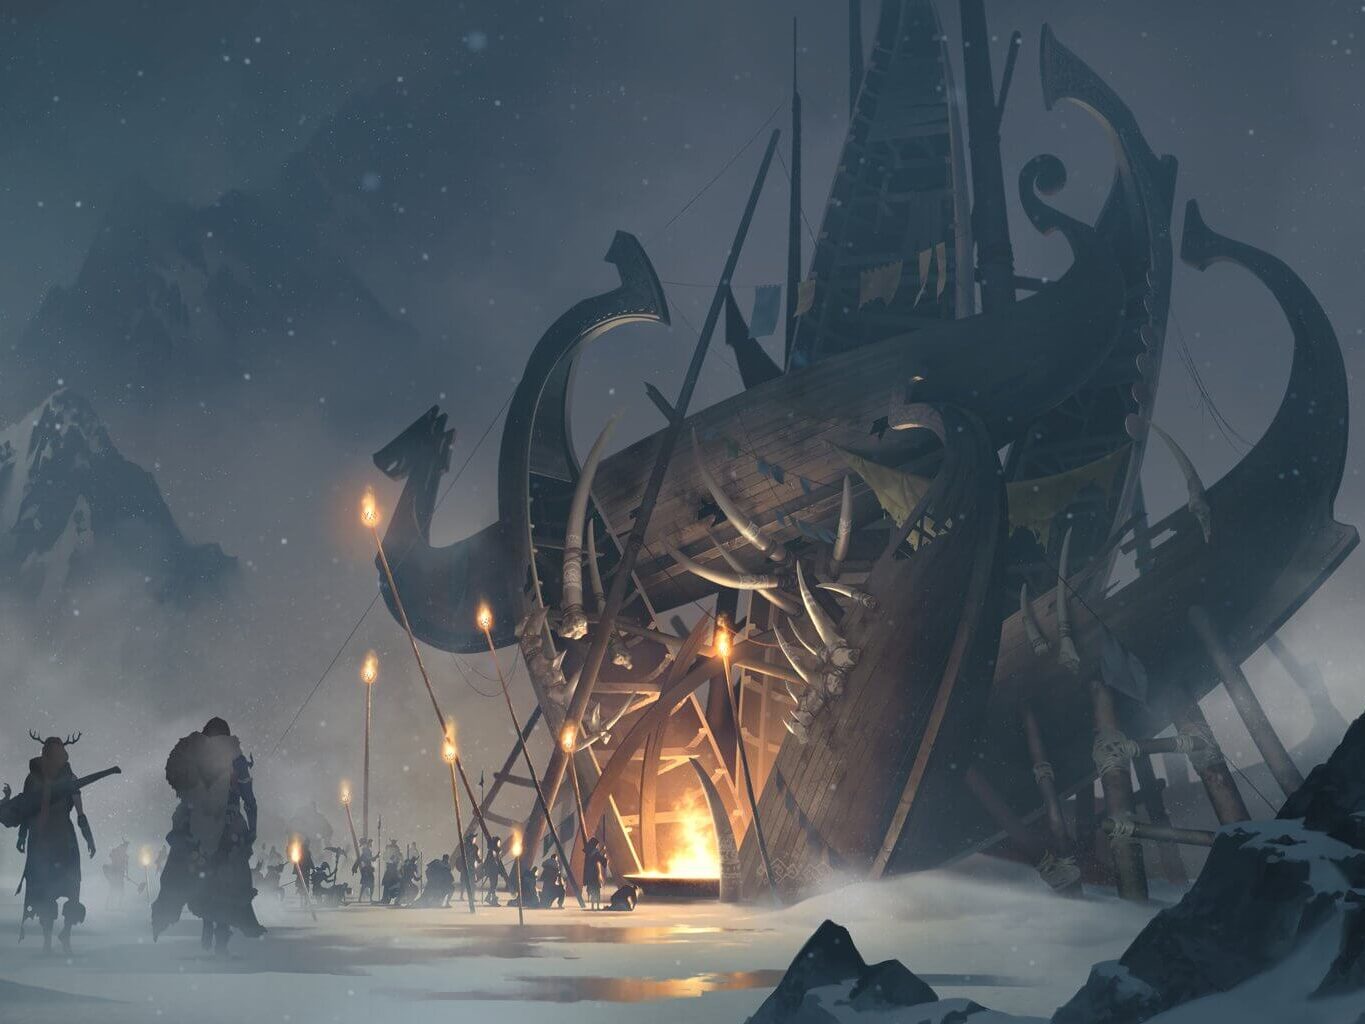 Riot MMO Factions Winter's Claw, a harsh Freljordian faction depicting nomadic architecture